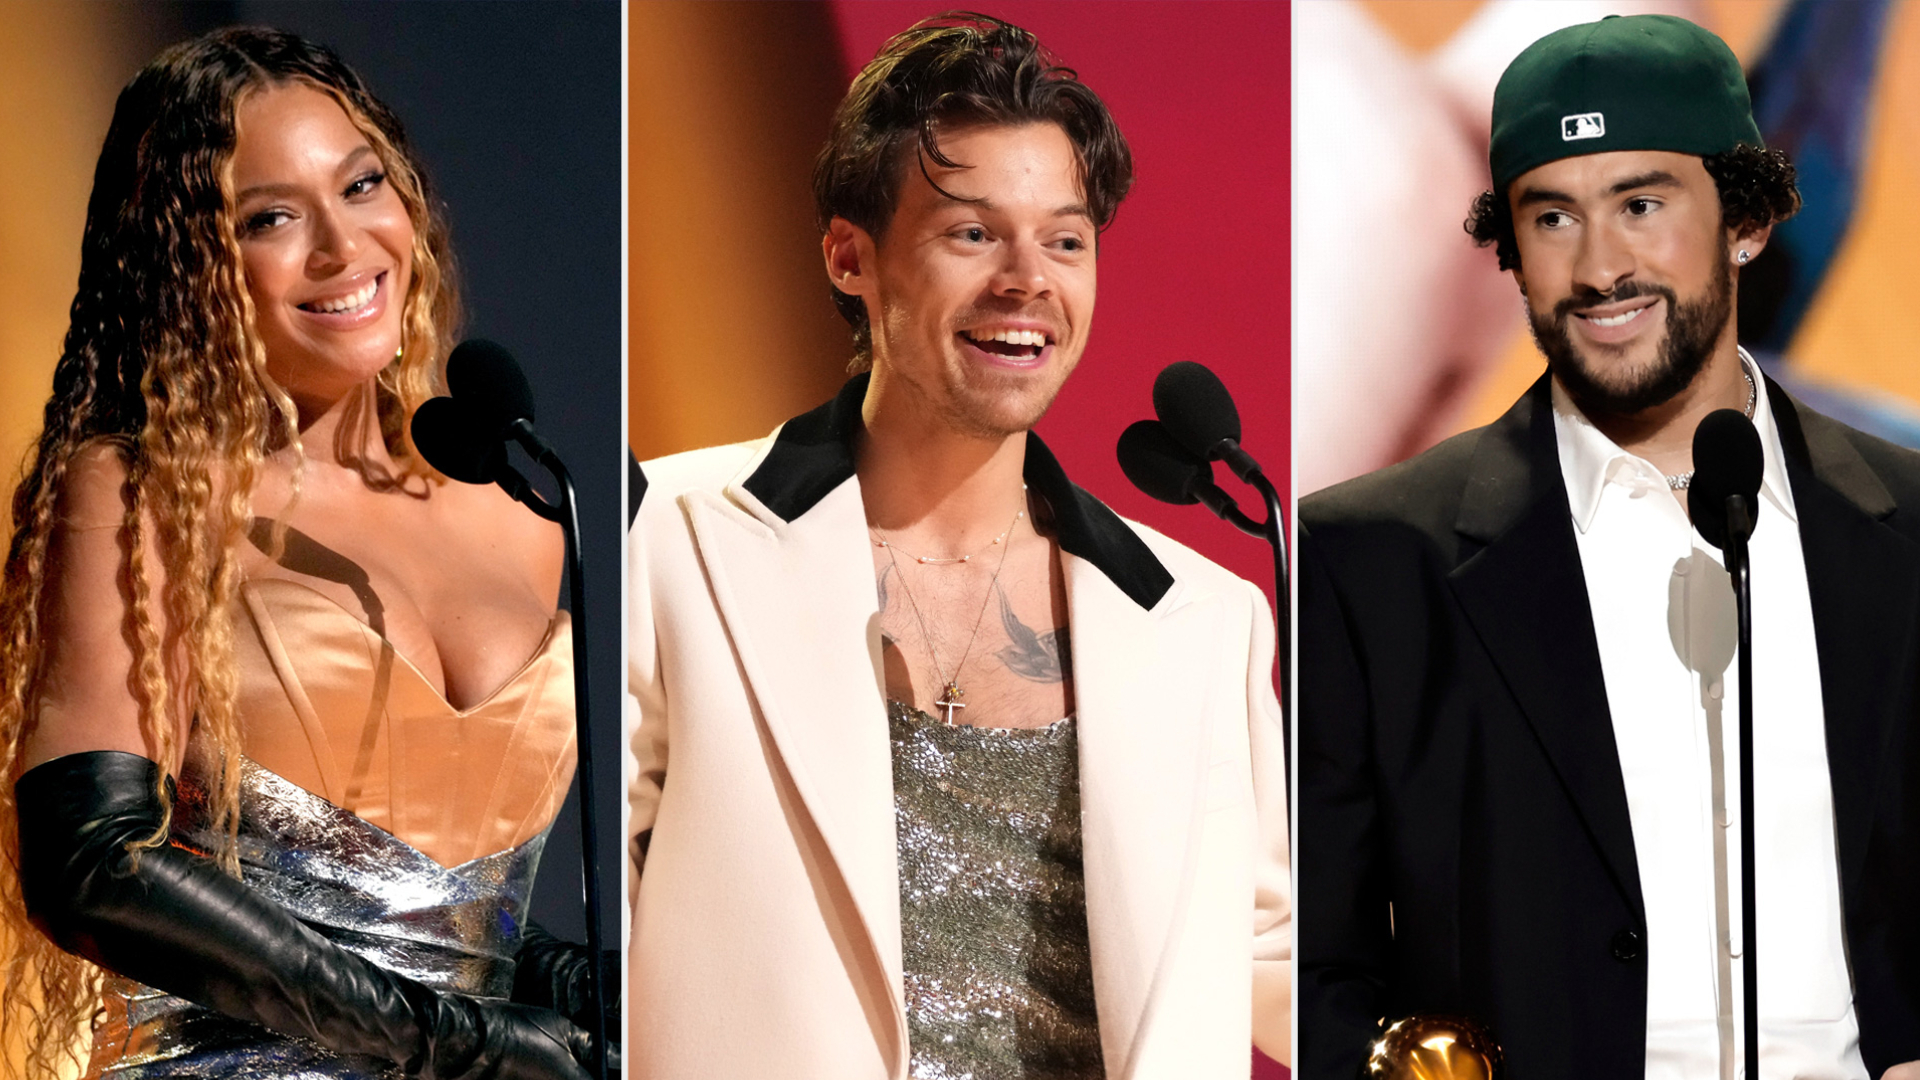 The 2023 GRAMMY Awards pulled in the highest ratings since 2020